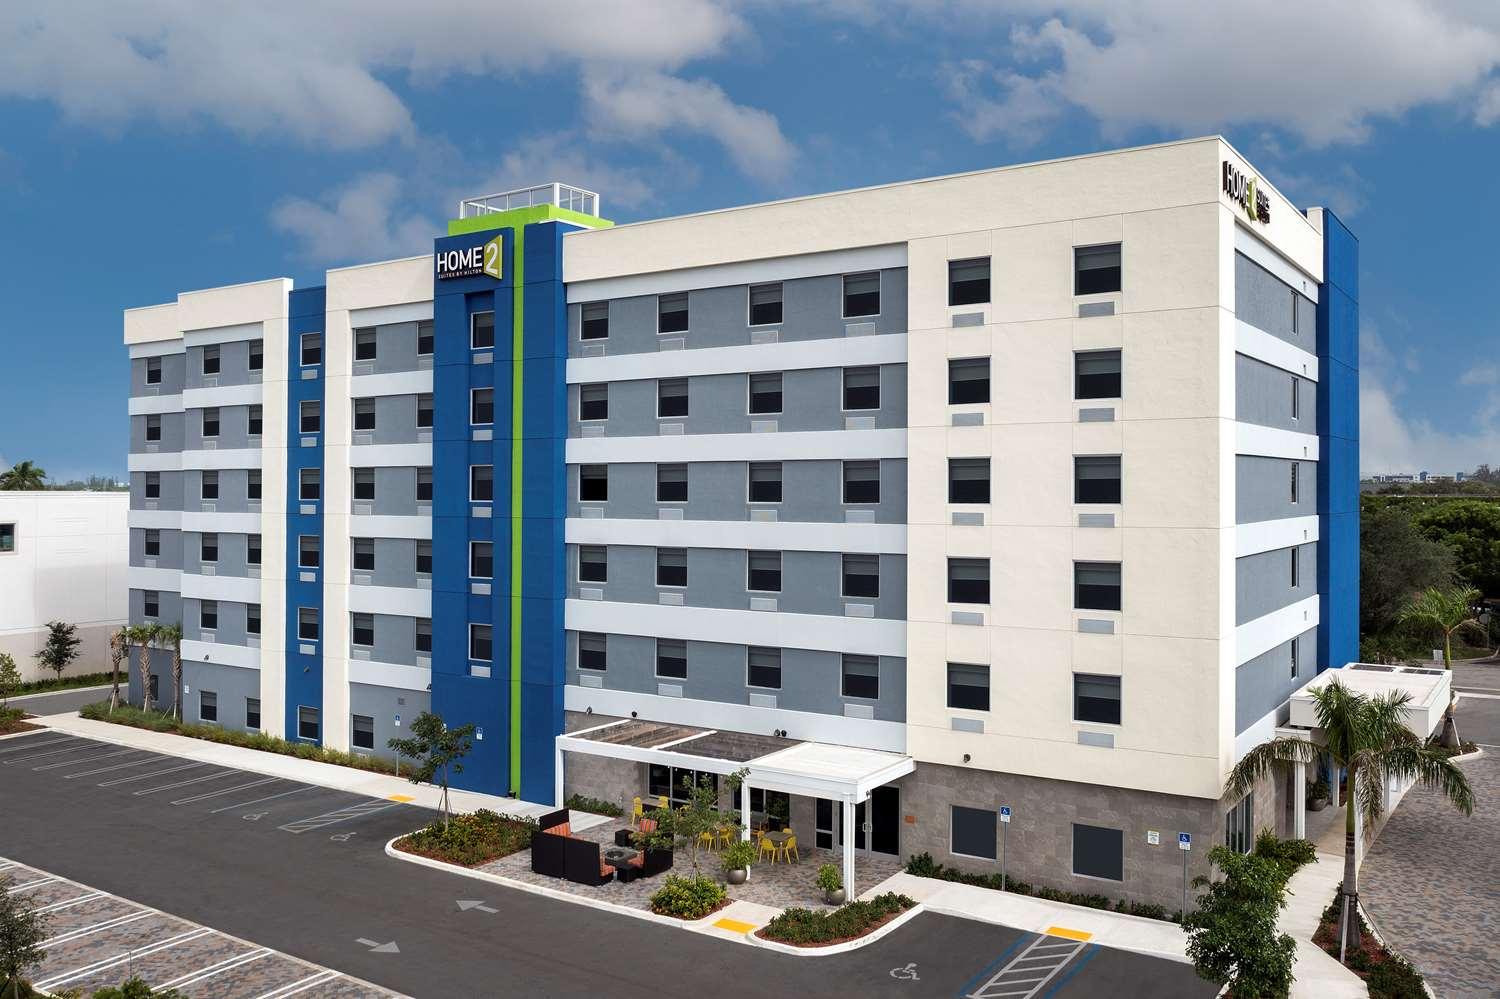 Home2 Suites by Hilton Miami Doral West Airport in Doral, FL